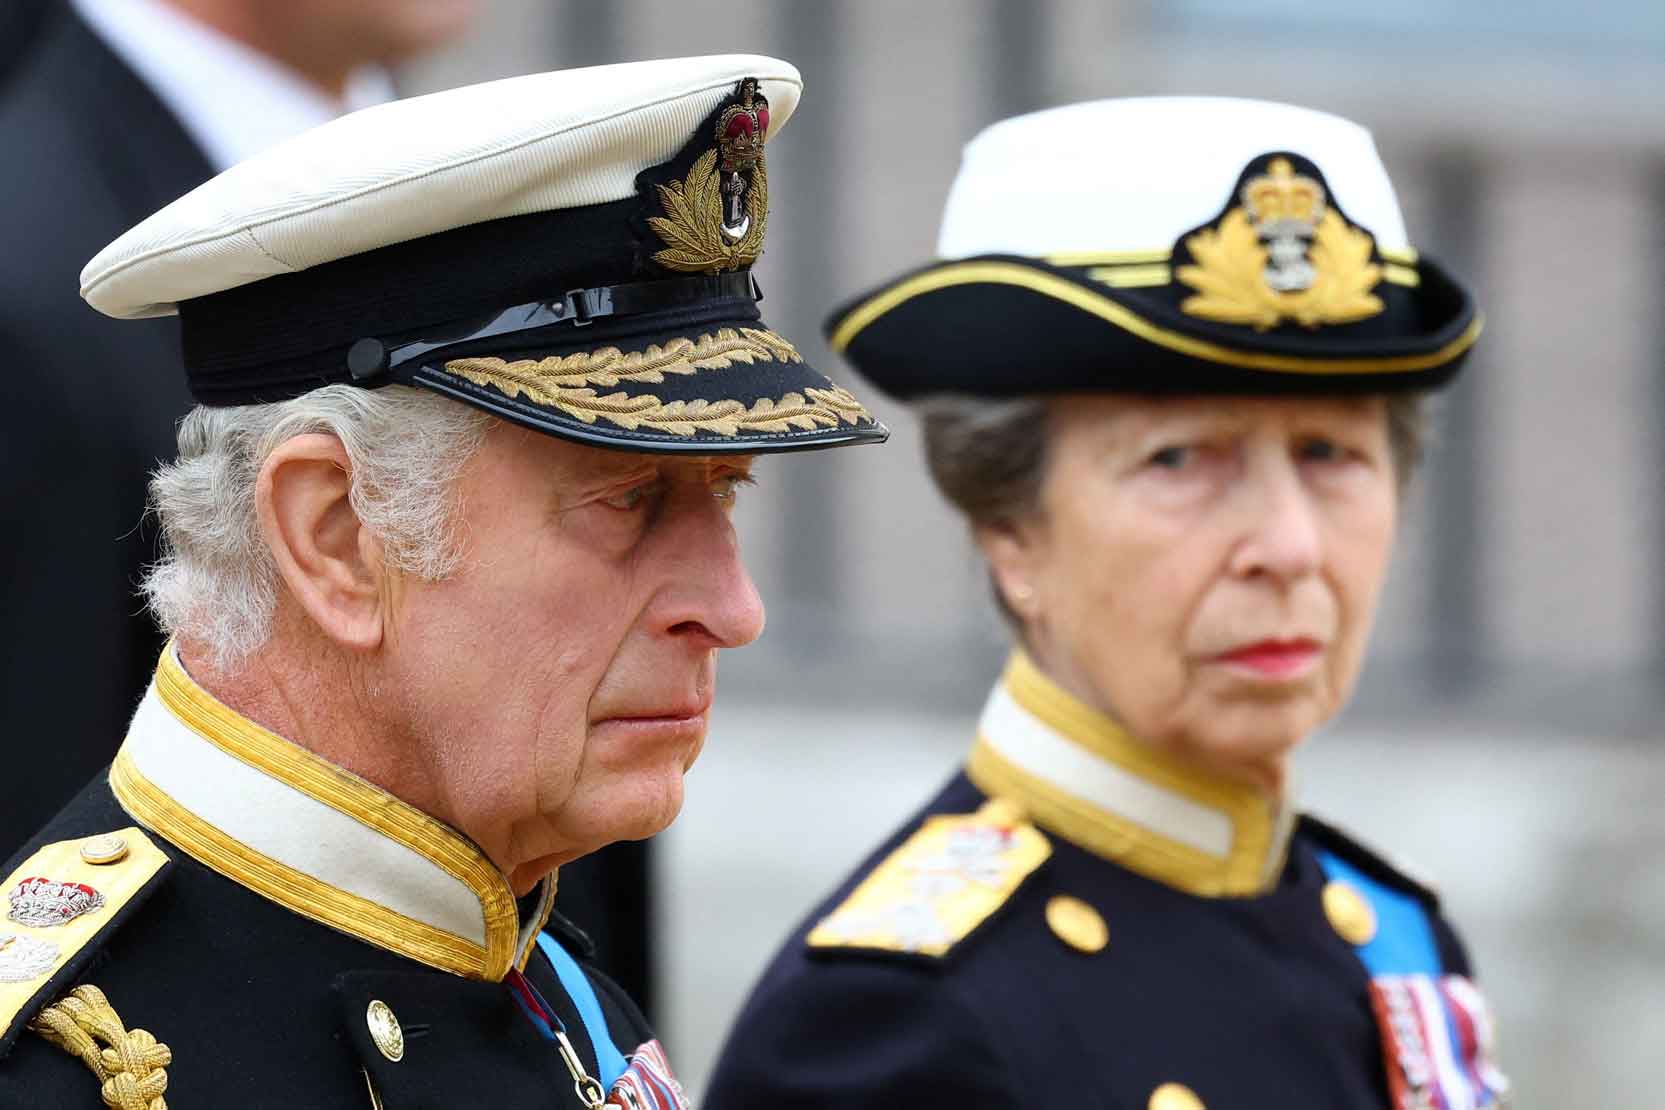 In pictures: Extraordinary photos from the Queen’s funeral